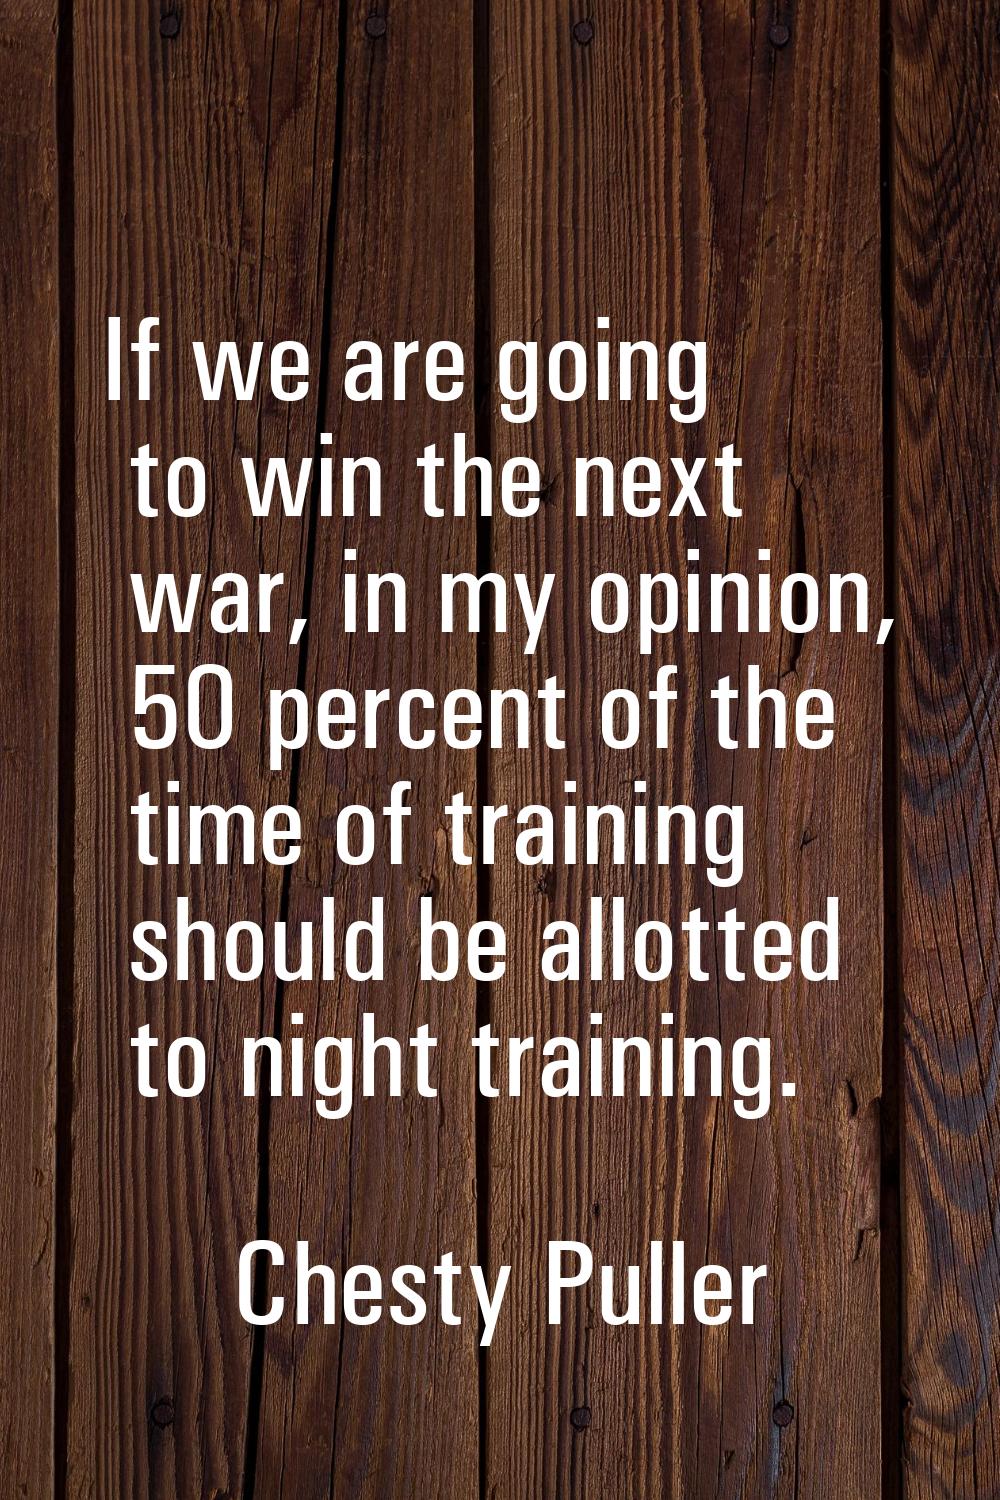 If we are going to win the next war, in my opinion, 50 percent of the time of training should be al